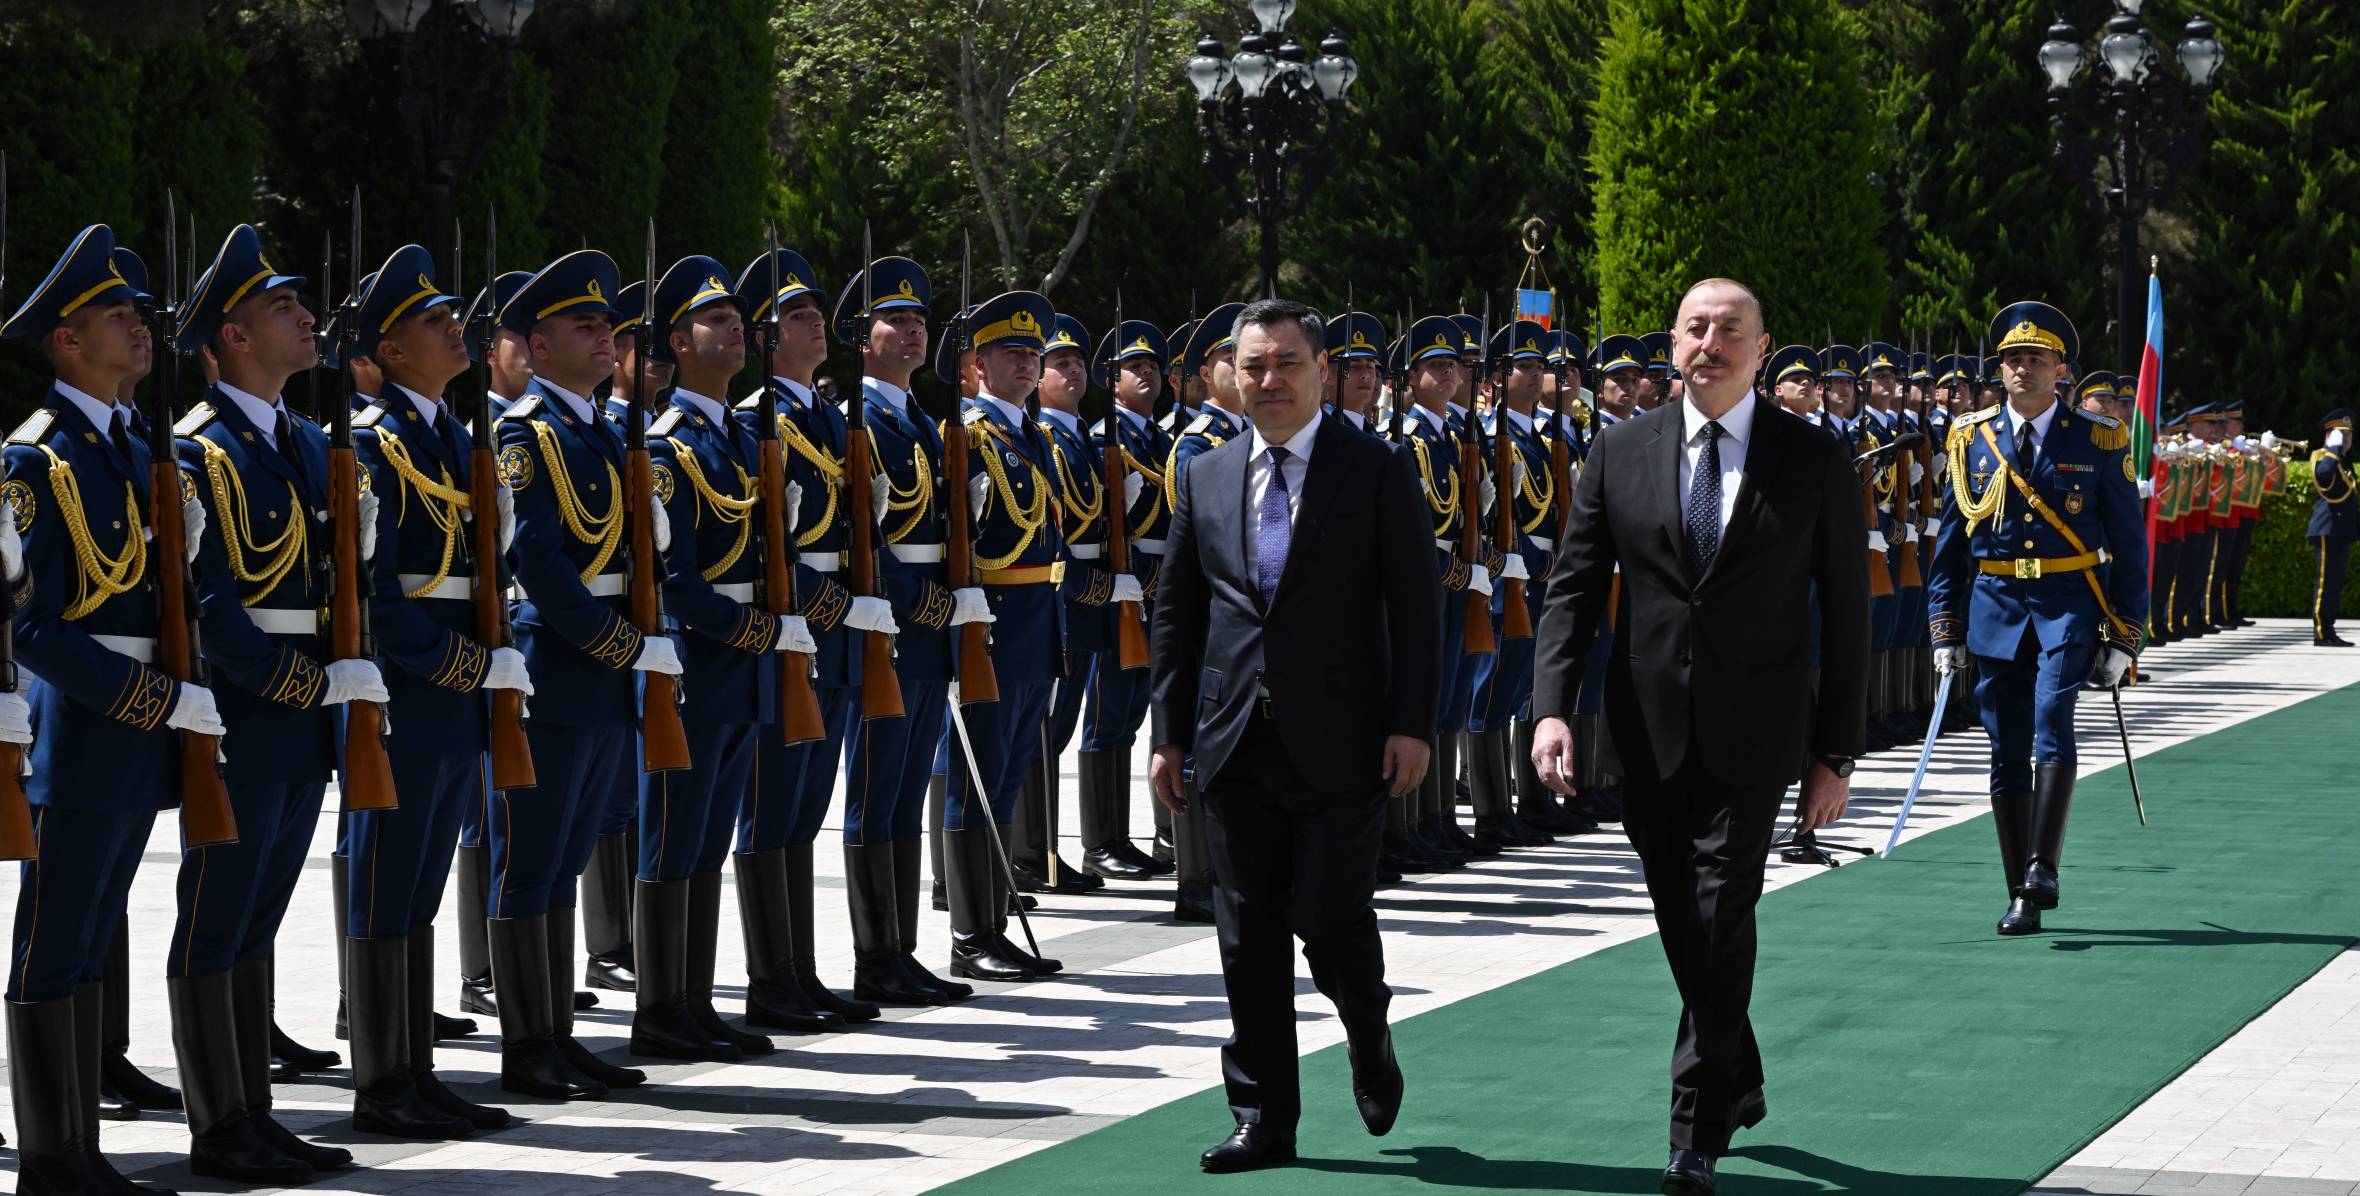 An official welcome ceremony was held for Sadyr Zhaparov, President of the Kyrgyz Republic